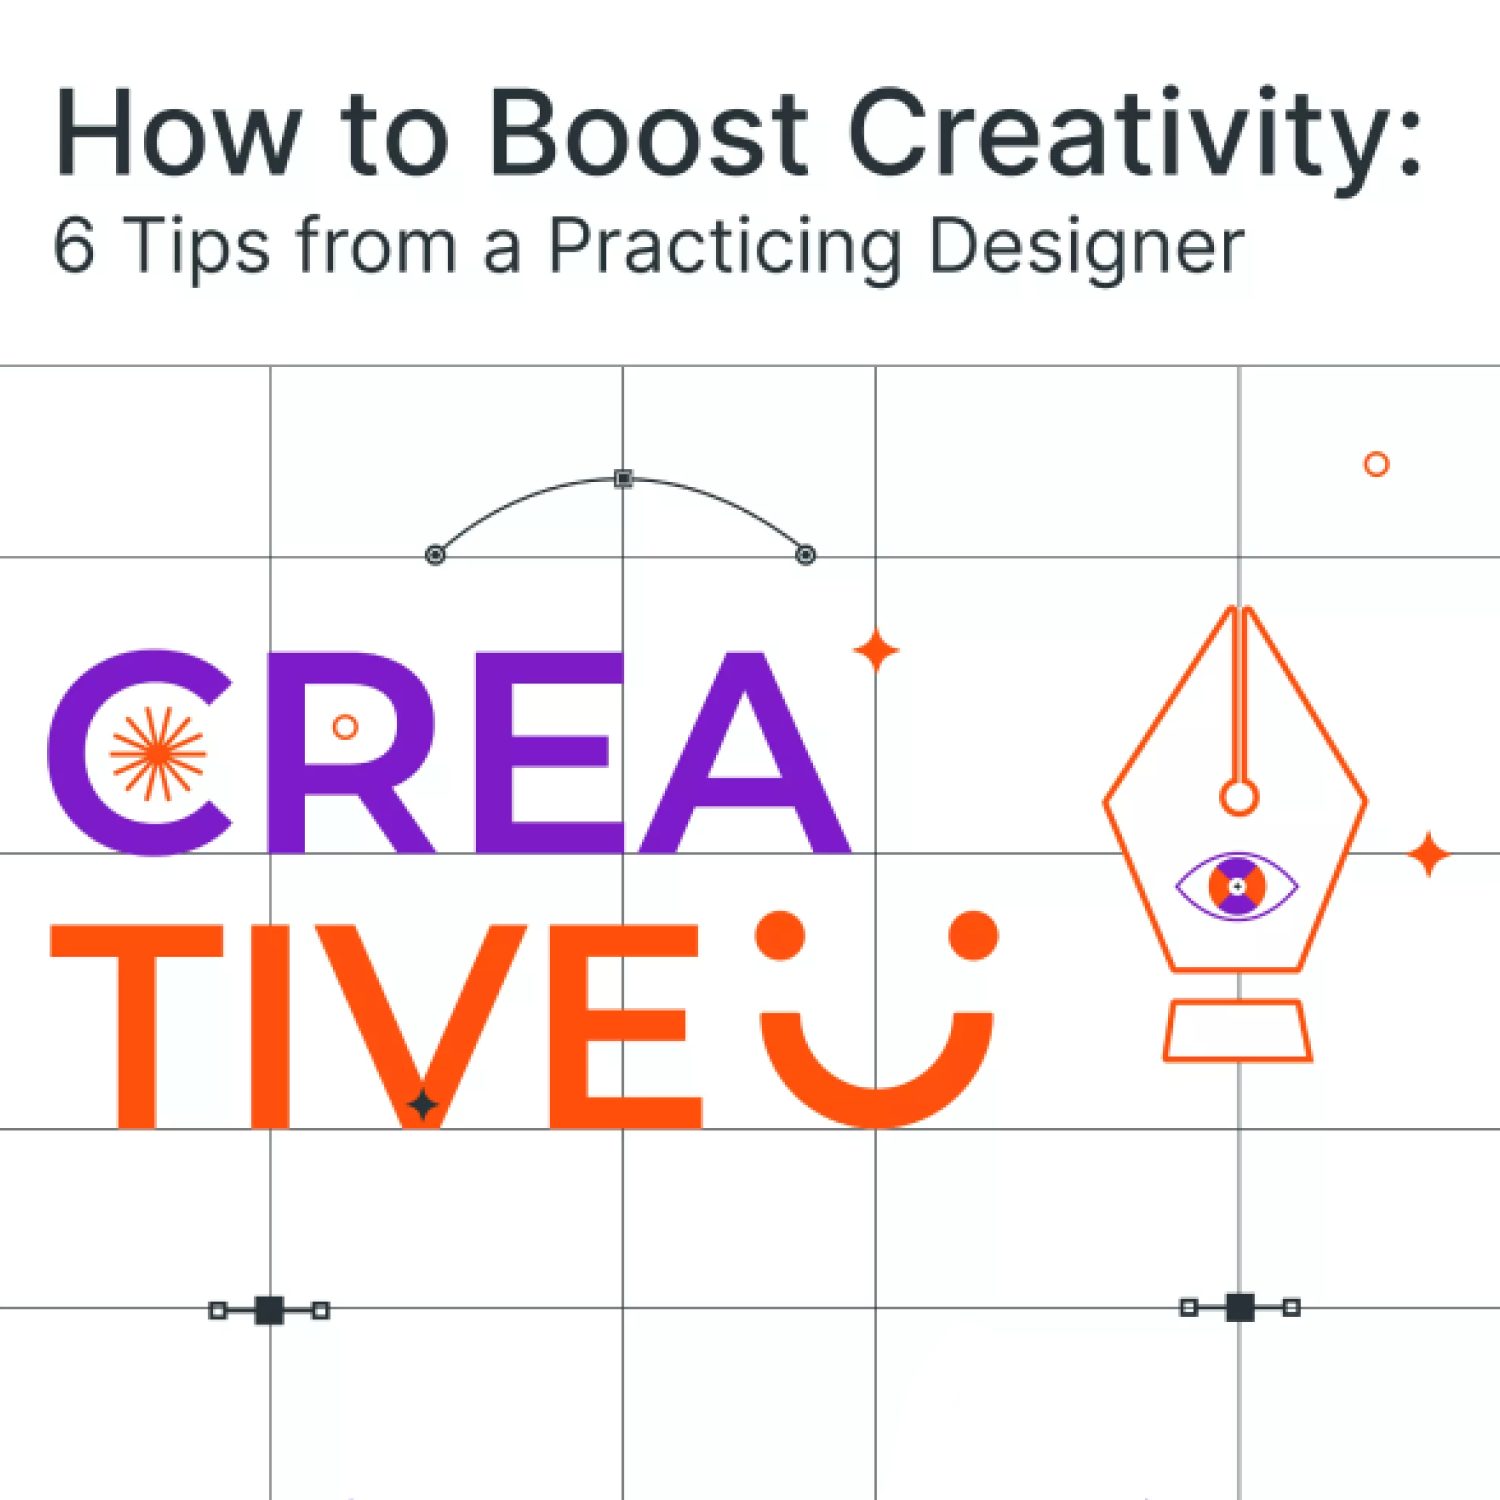 1 getting out of creative stagnation 6 ways to boost your creativity.